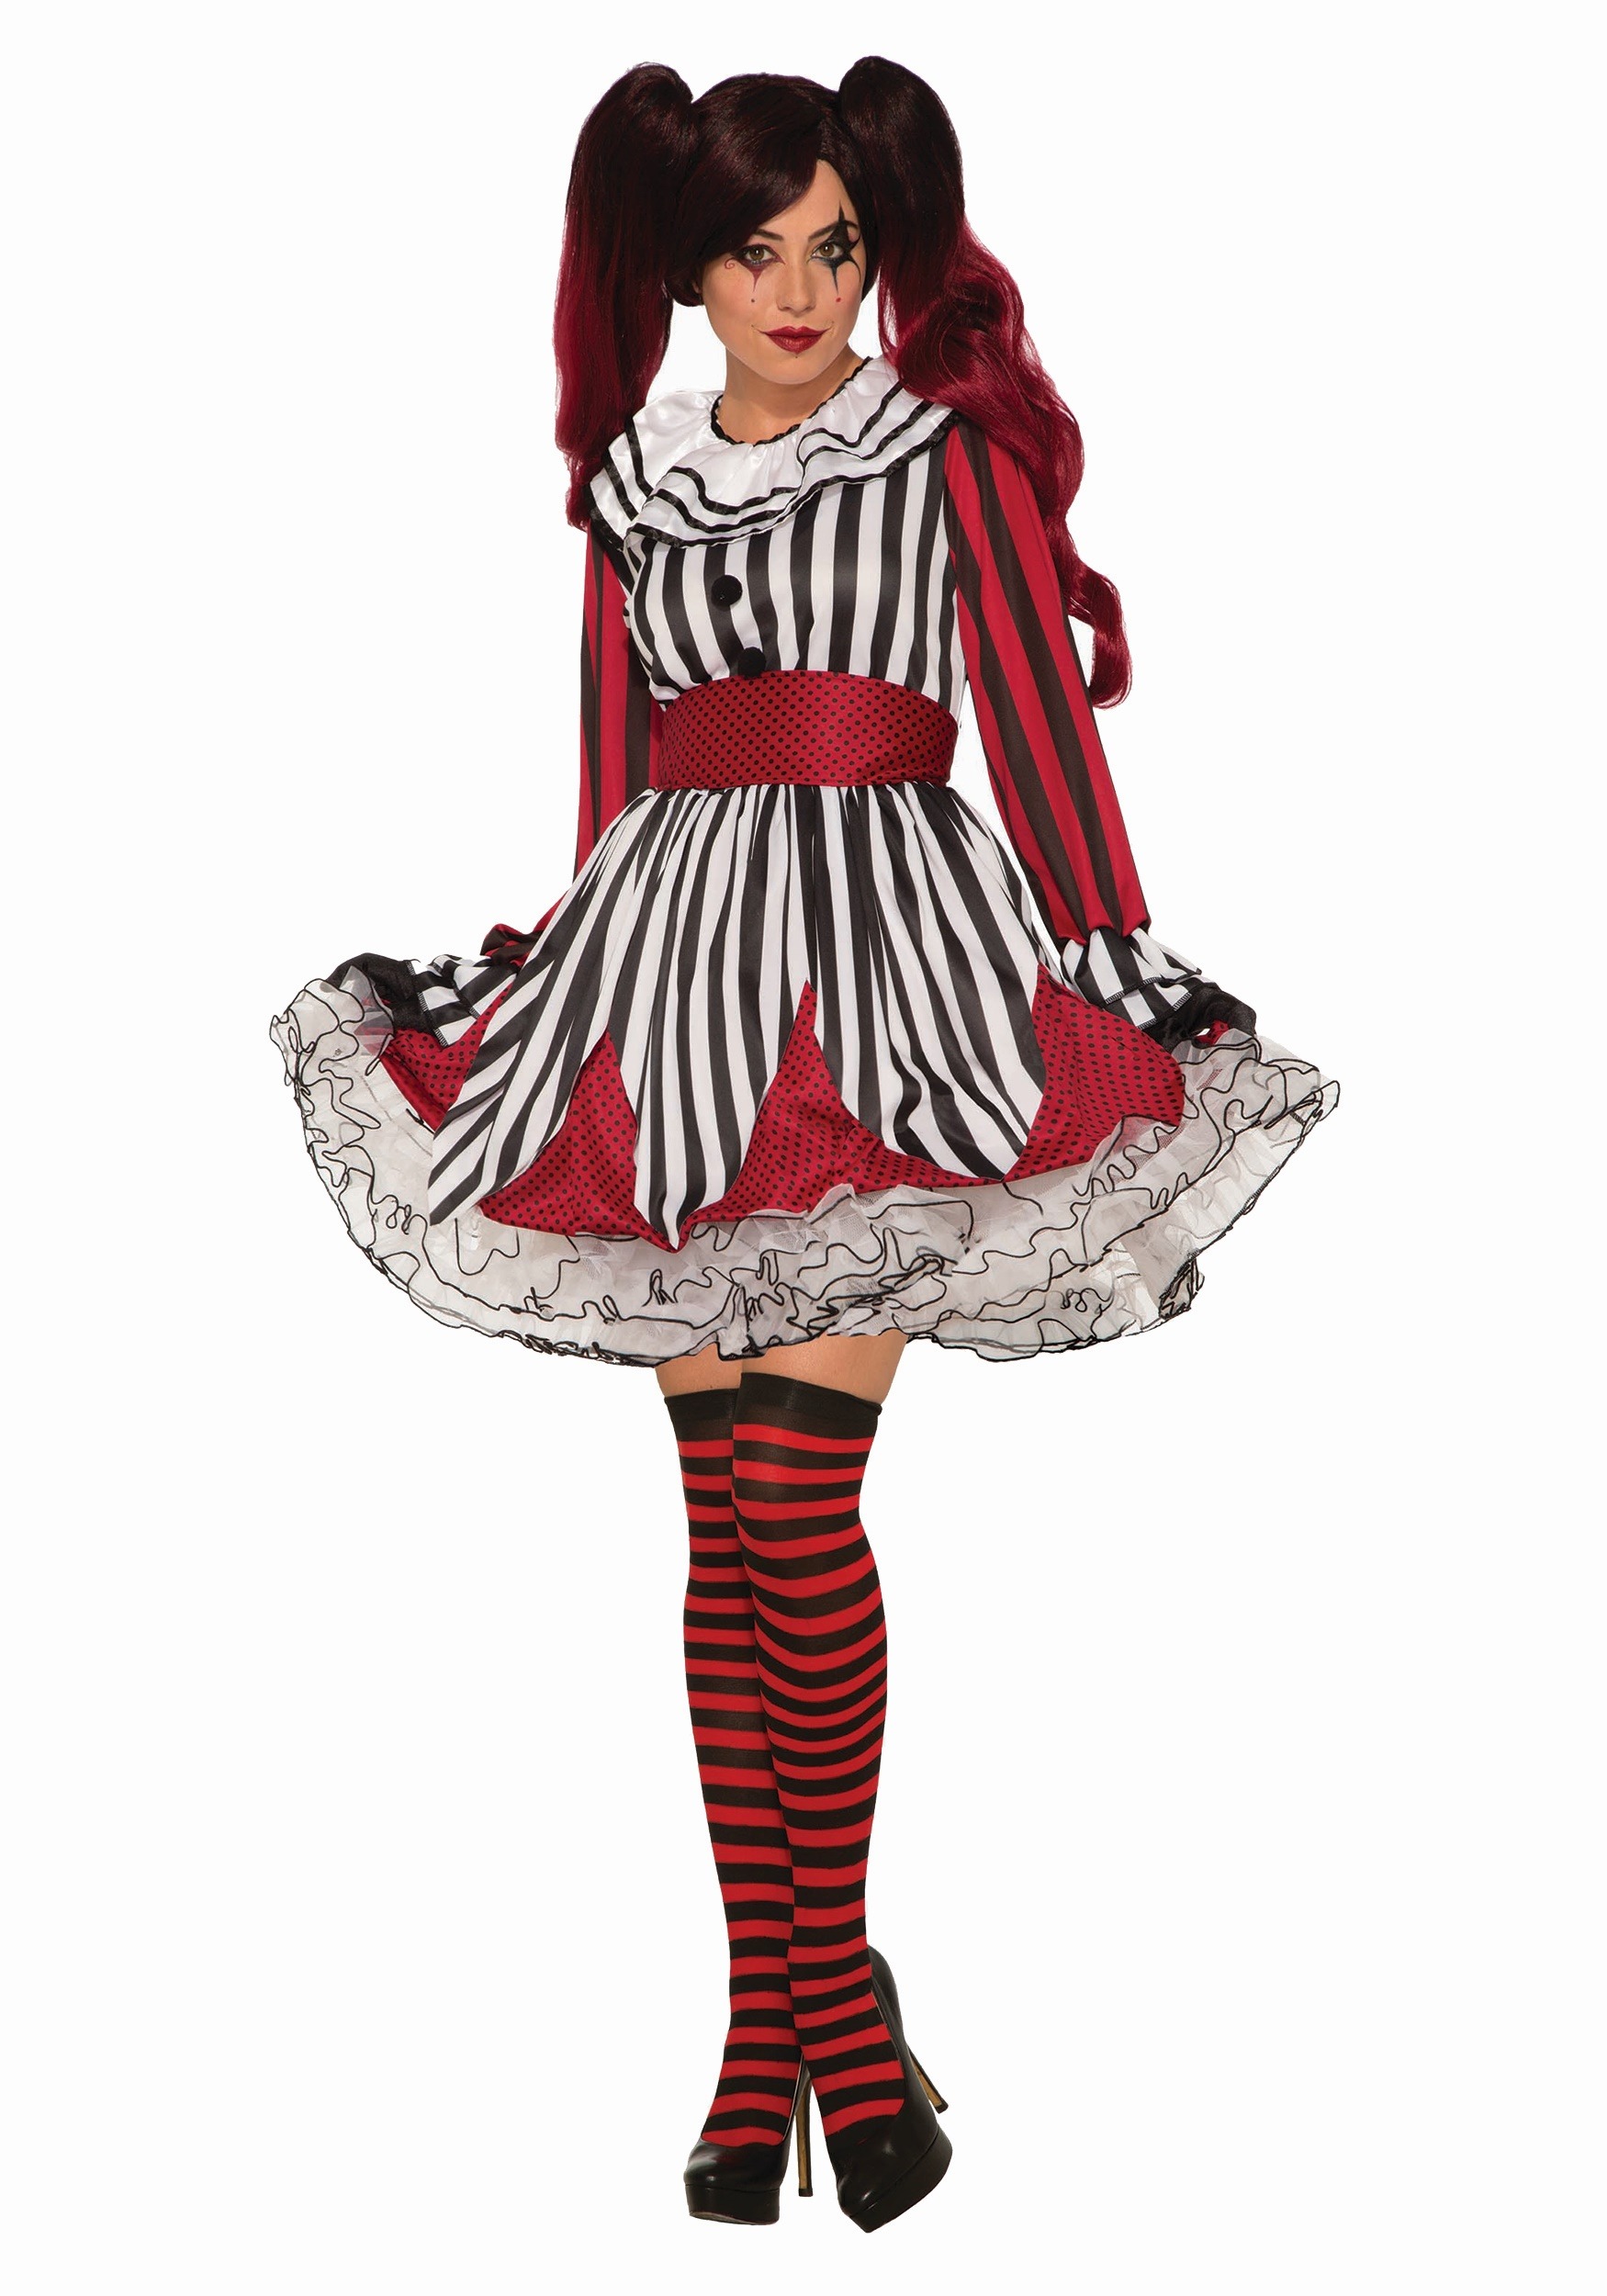 Womens clown outfit